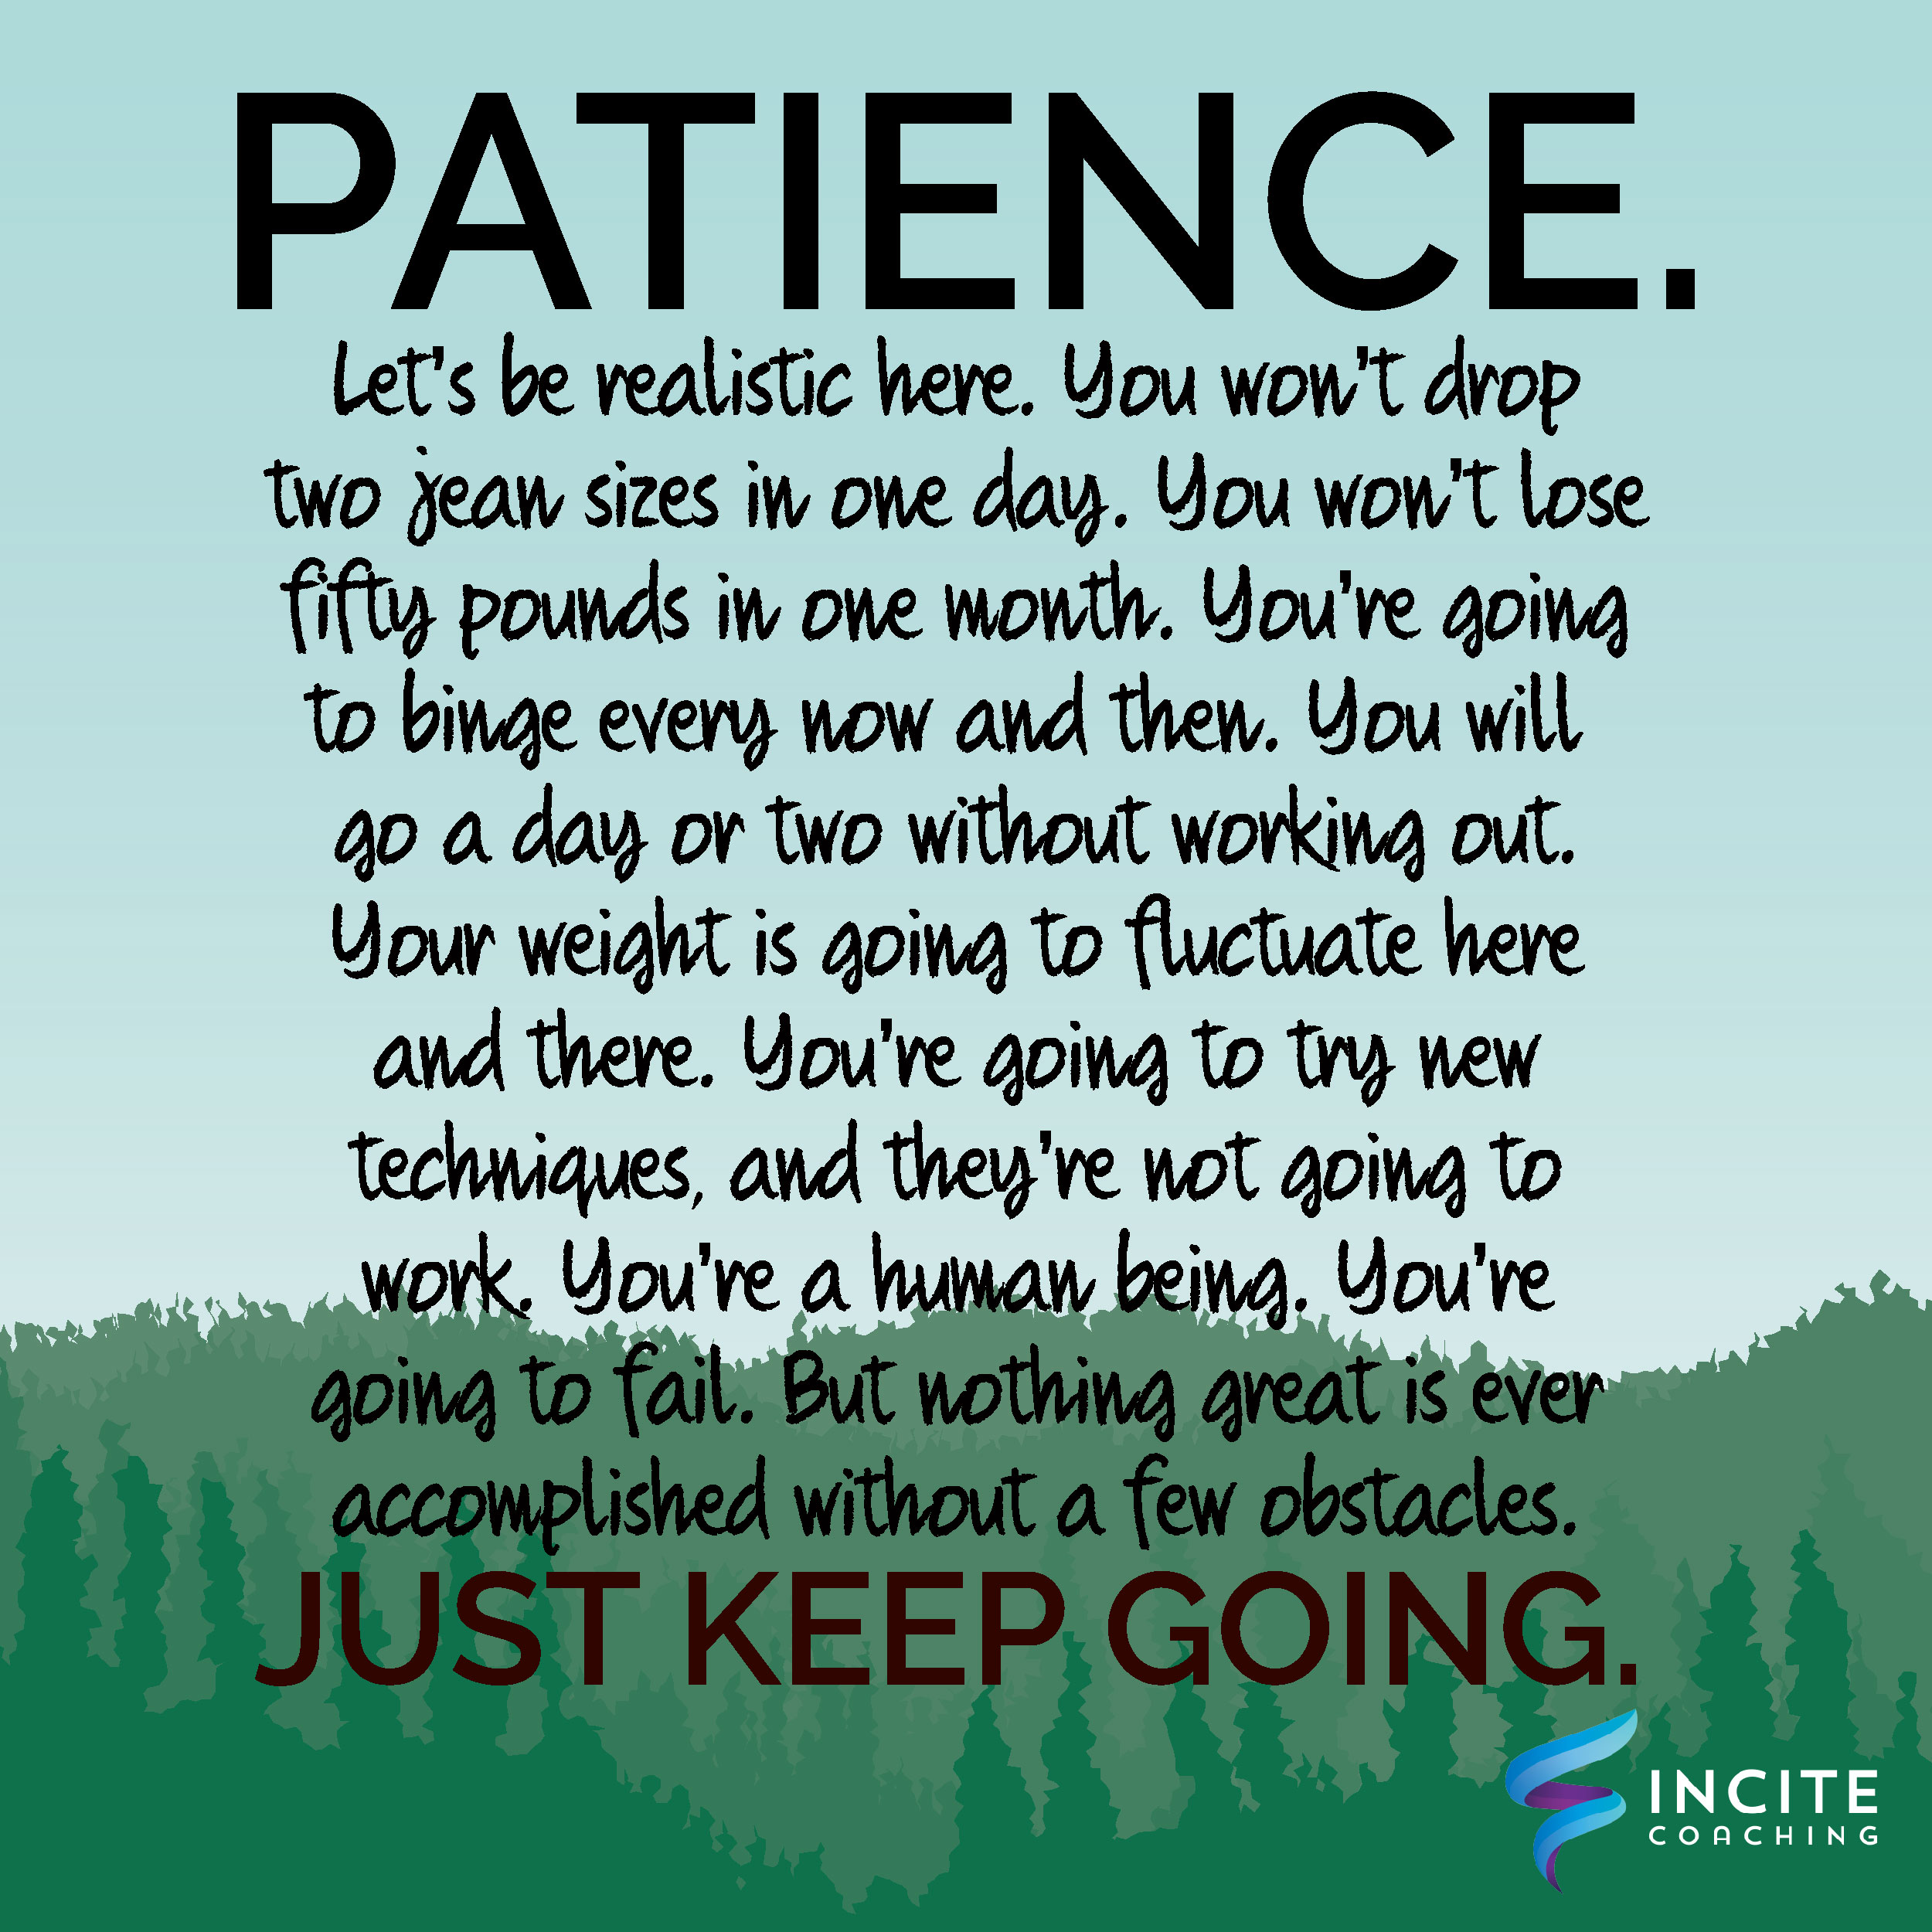 Patience - Let's be realistic here. You won't drop two jean sizes in one day. You won't lose fifty pounds in one month. You're going to binge every now and then. You will go a day or two without working out. Your weight is going to fluctuate here and there. You're going to try new techniques, and they're not going to work. You're a human being. You're going to fail. But nothing great is ever accomplished without a few obstacles. Just keep going.